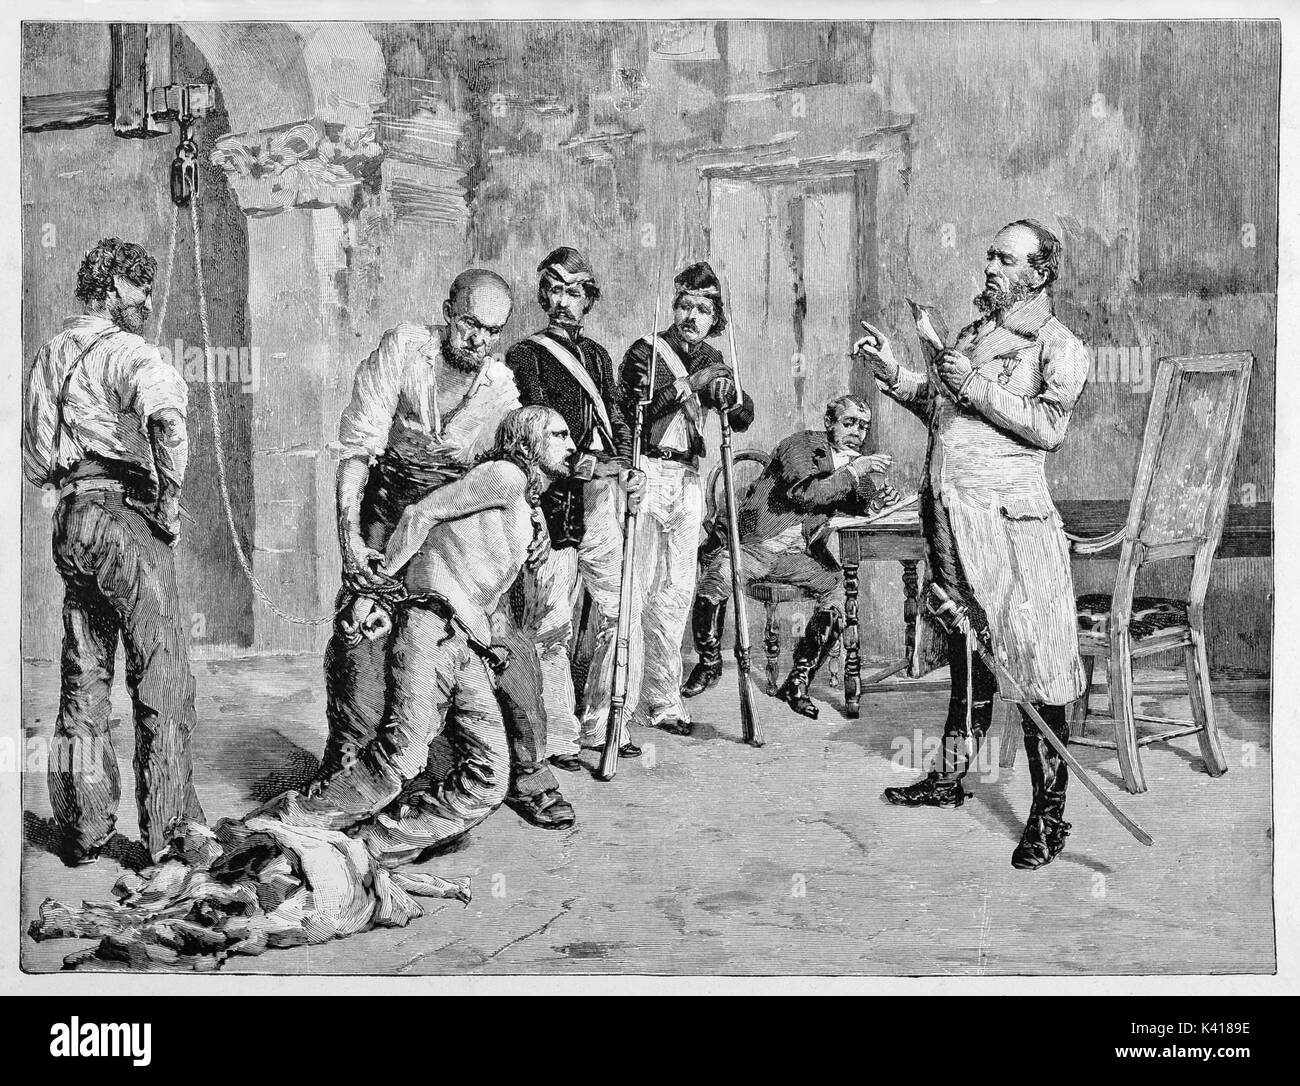 Garibaldi prisoner and tortured spitting in the face of Gualeguay commander Argentina. Indoor context By E. Matania published on Garibaldi e i Suoi Tempi Milan Italy 1884 Stock Photo